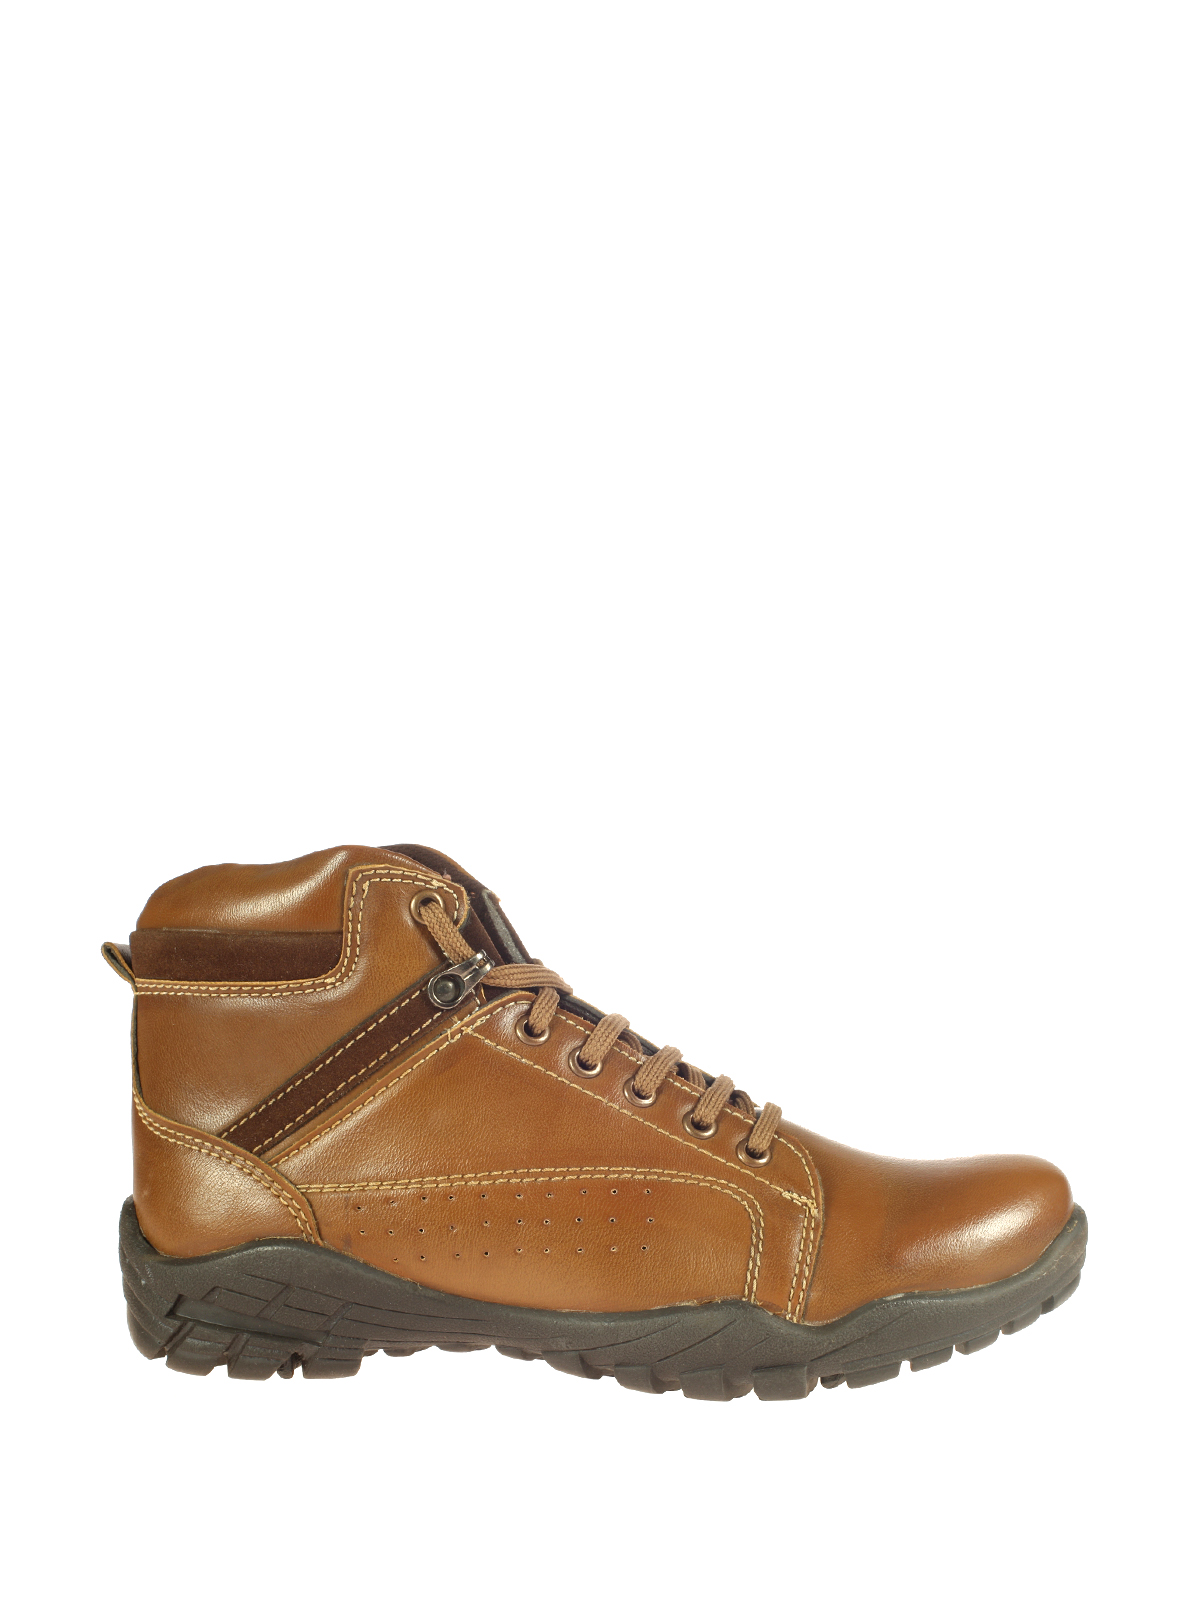 Buy Khadims Turk Brown Cowboy Boots Online @ ₹1799 from ShopClues